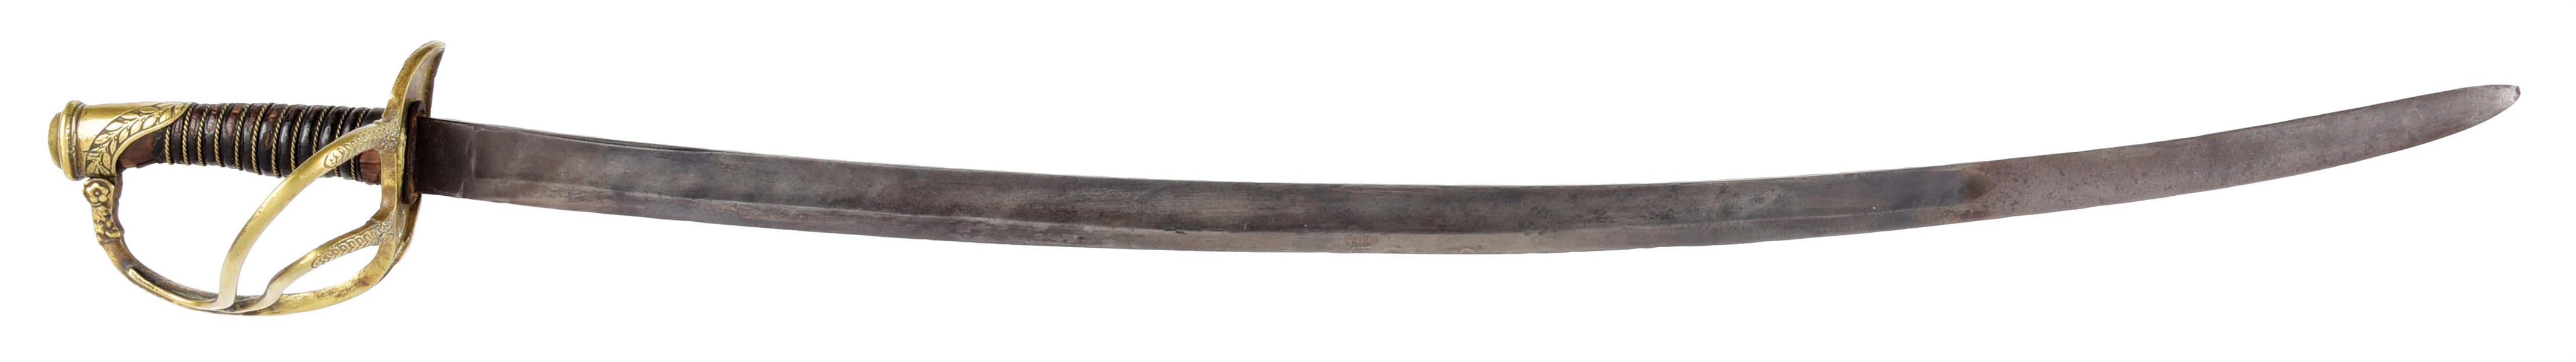 RARE THOMAS, GRISWOLD & CO., NEW ORLEANS MARKED CONFEDERATE CAVALRY OFFICERS SABER.